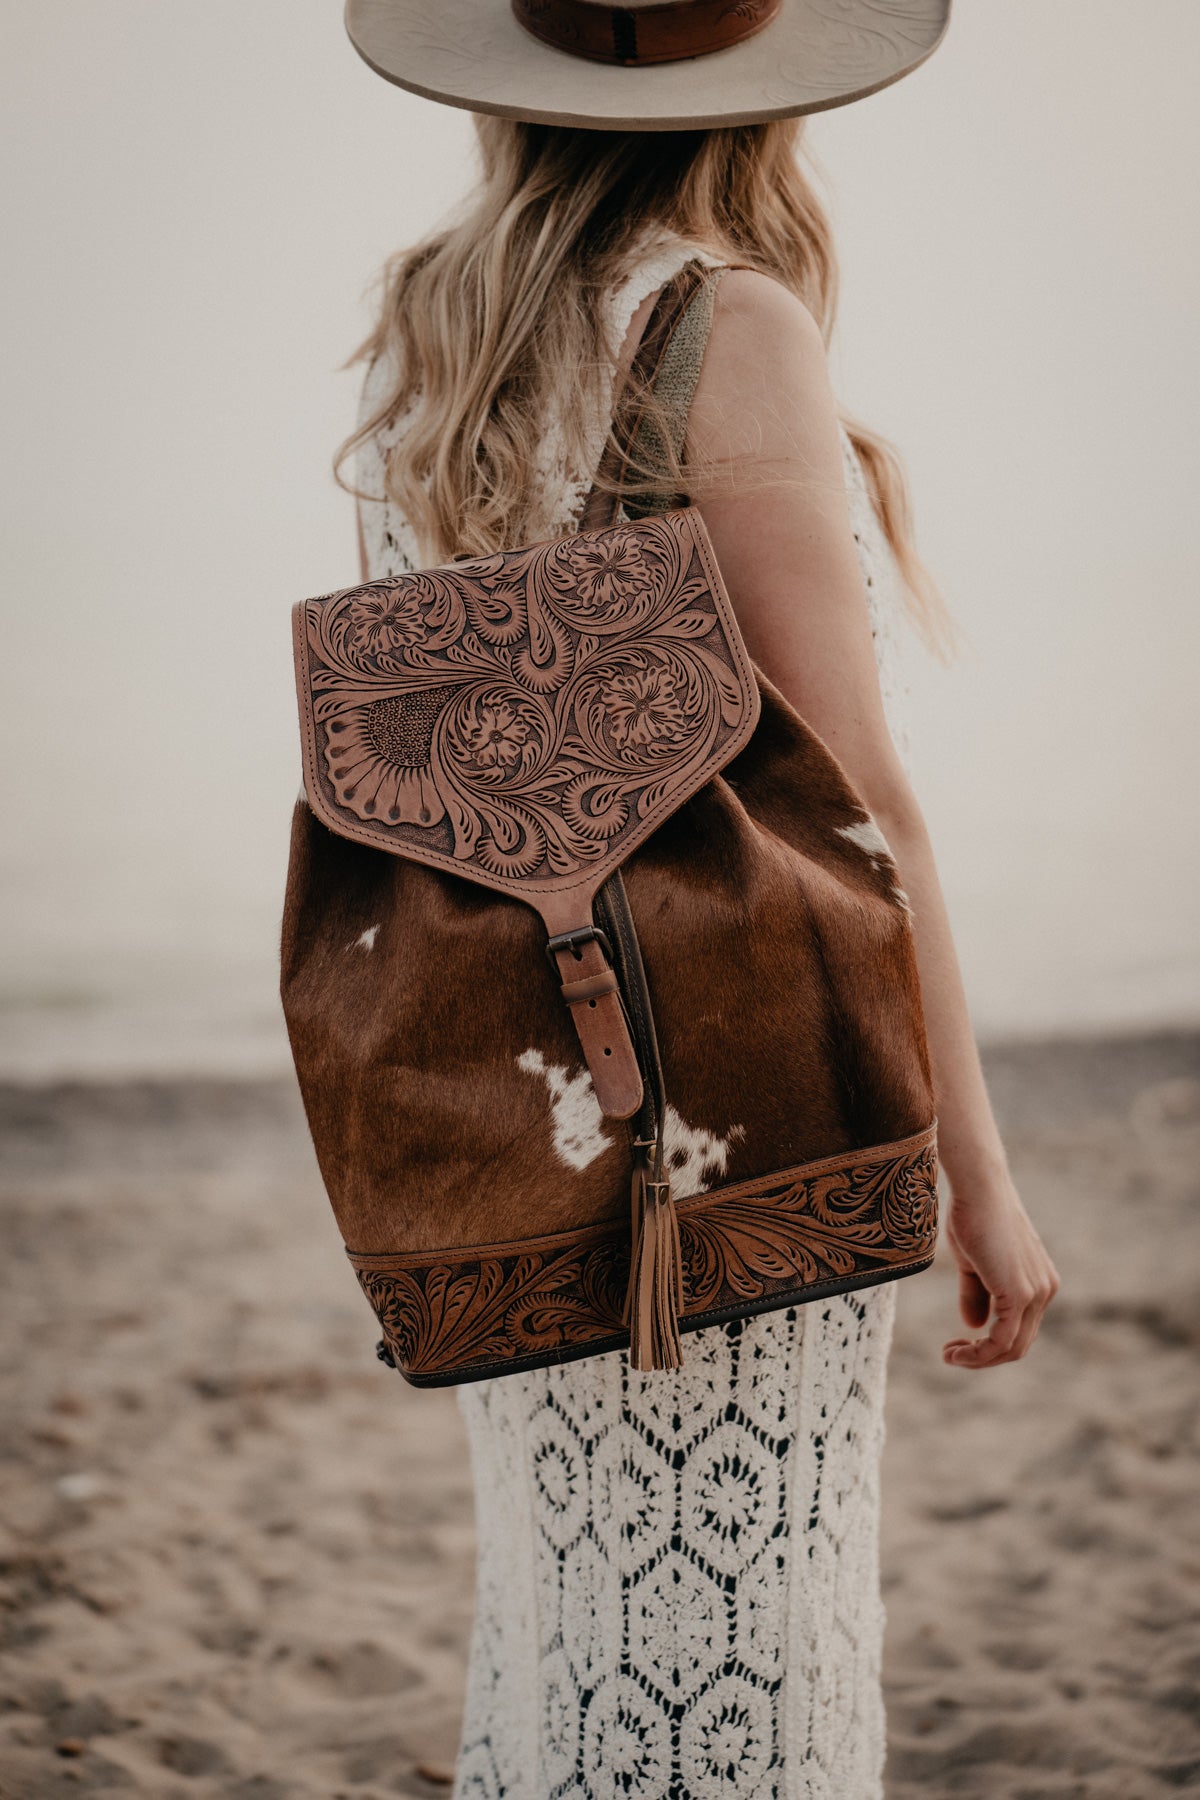 'Rory' Tooled Leather Back Pack (2 Options)